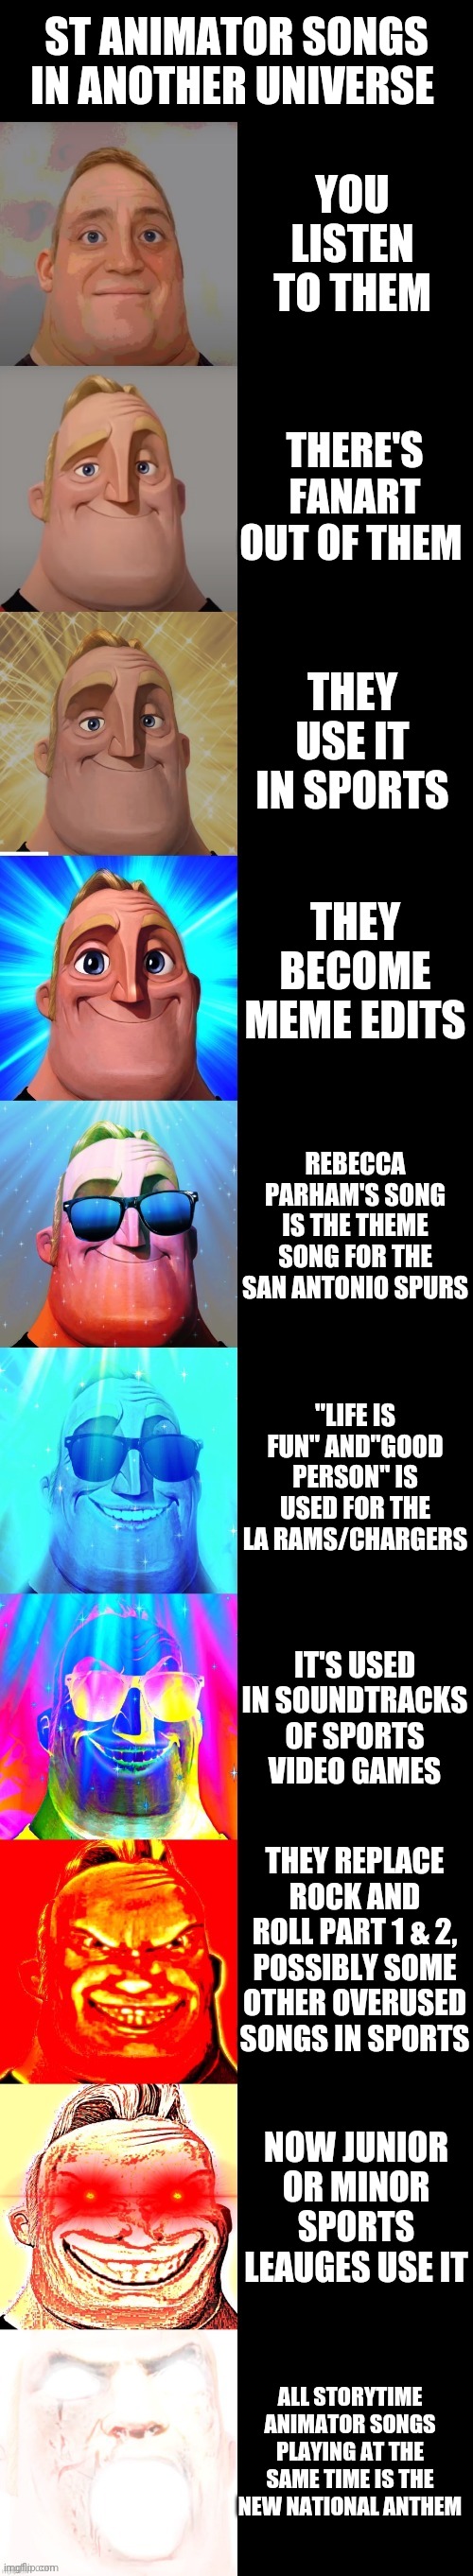 I Hope This Meme Will Predict This | ST ANIMATOR SONGS IN ANOTHER UNIVERSE; YOU LISTEN TO THEM; THERE'S FANART OUT OF THEM; THEY USE IT IN SPORTS; THEY BECOME MEME EDITS; REBECCA PARHAM'S SONG IS THE THEME SONG FOR THE SAN ANTONIO SPURS; "LIFE IS FUN" AND"GOOD PERSON" IS USED FOR THE LA RAMS/CHARGERS; IT'S USED IN SOUNDTRACKS OF SPORTS VIDEO GAMES; THEY REPLACE ROCK AND ROLL PART 1 & 2, POSSIBLY SOME OTHER OVERUSED SONGS IN SPORTS; NOW JUNIOR OR MINOR SPORTS LEAUGES USE IT; ALL STORYTIME ANIMATOR SONGS PLAYING AT THE SAME TIME IS THE NEW NATIONAL ANTHEM | image tagged in mr incredible becoming canny,animators,sports | made w/ Imgflip meme maker